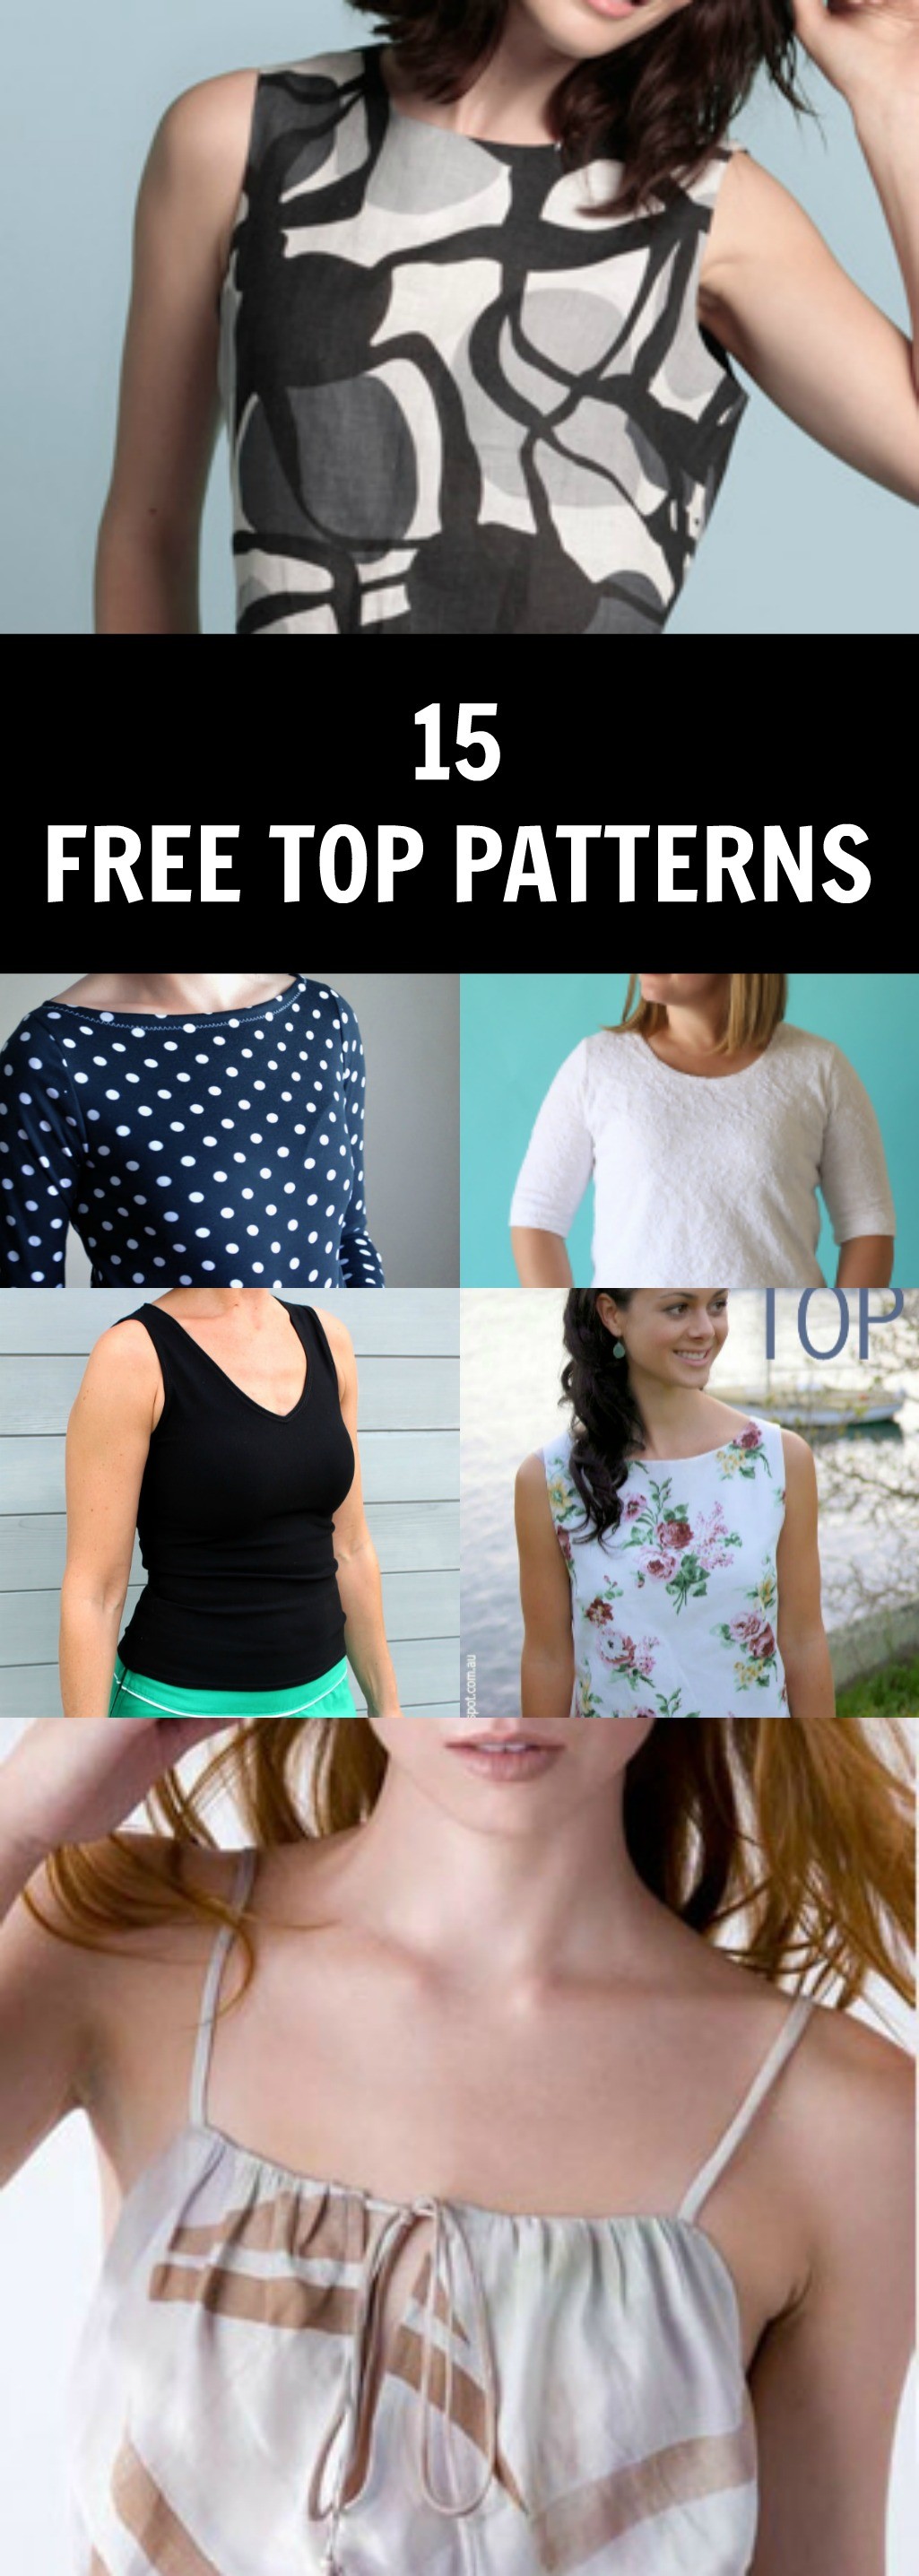 printable-downloadable-free-sewing-patterns-pdf-pdf-sewing-patterns-sewing-patterns-free